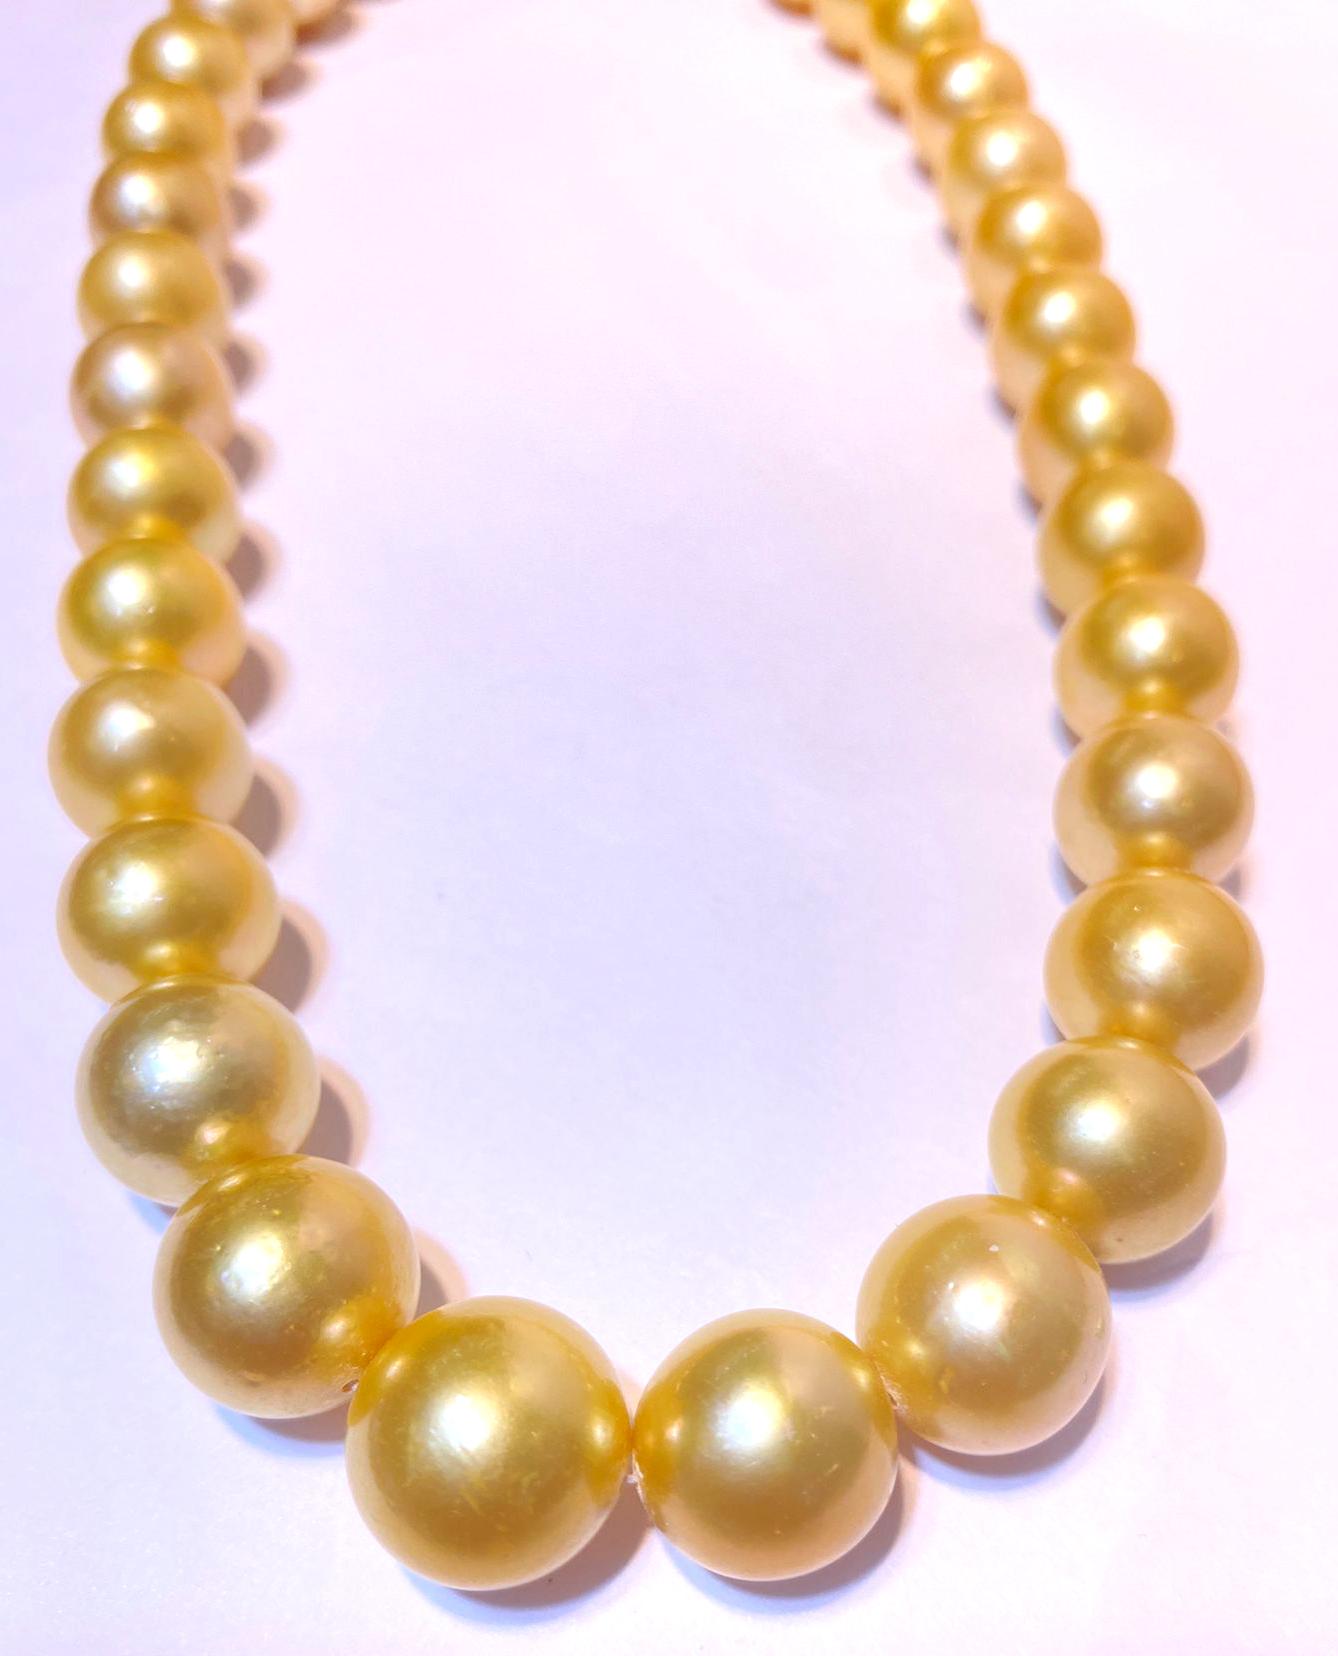 Round 12-14mm golden south sea pearl 33pcs 16inches will be more when strung #JS13
